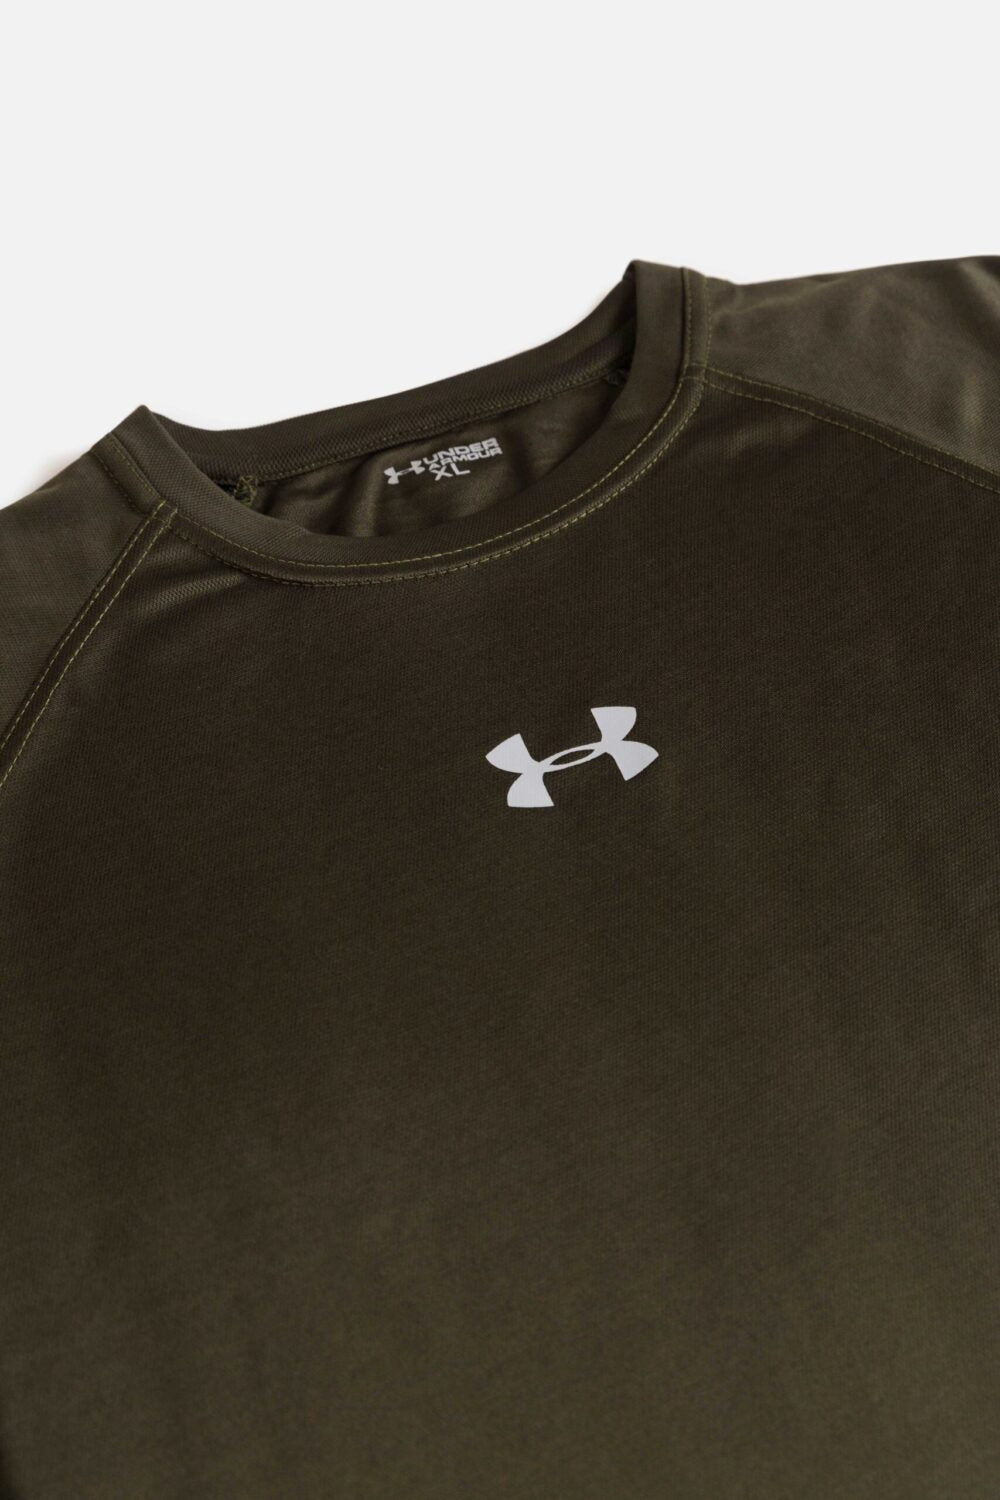 Under Armour Full Sleeves Dri-FIT T Shirt – Green